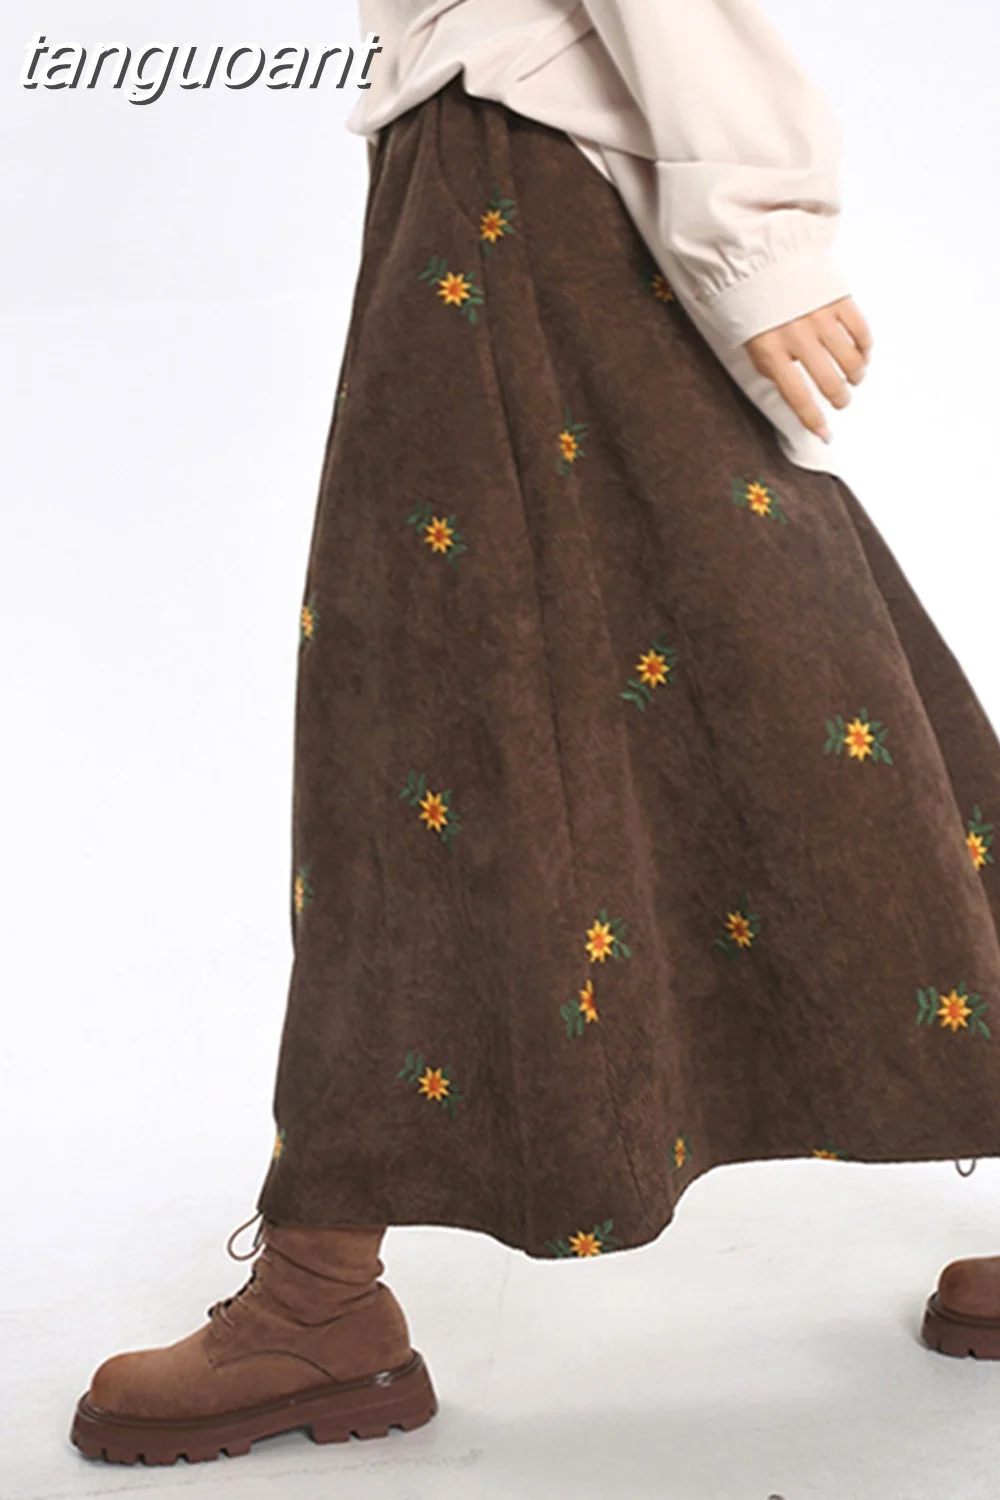 tanguoant Spring Women High Waist Skirts Korean Style Vintage Corduroy Mid-long A-line Floral Embroidery Loose Retro Skirt Feamle Y2K